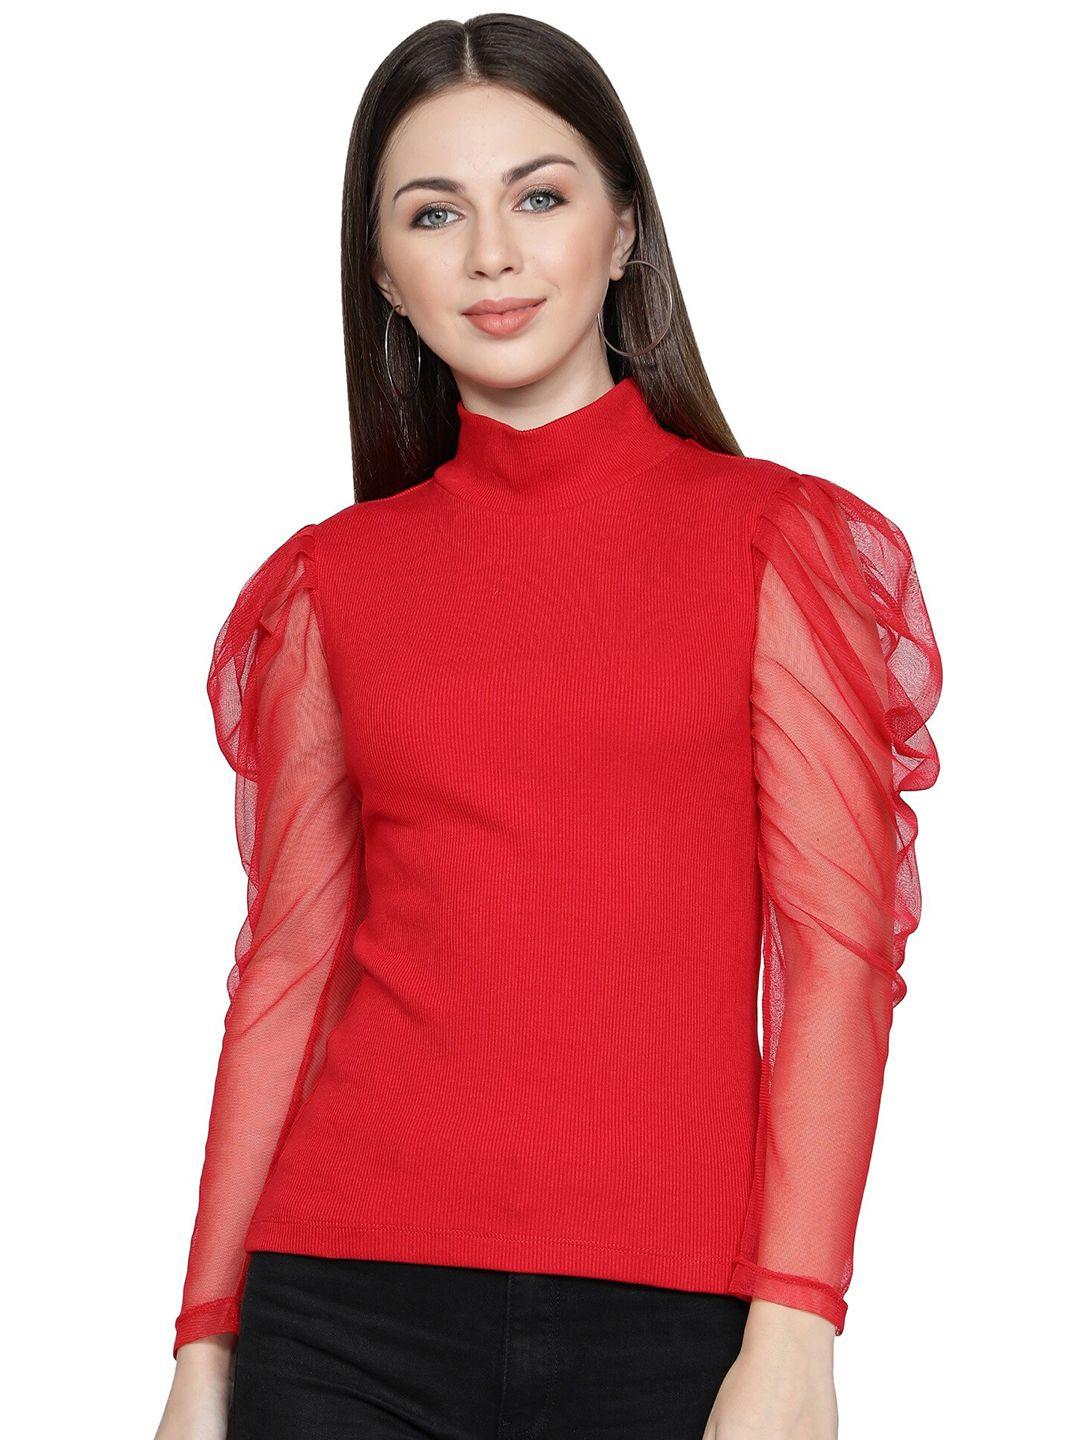 nuevosdamas women red solid puff sleeves top